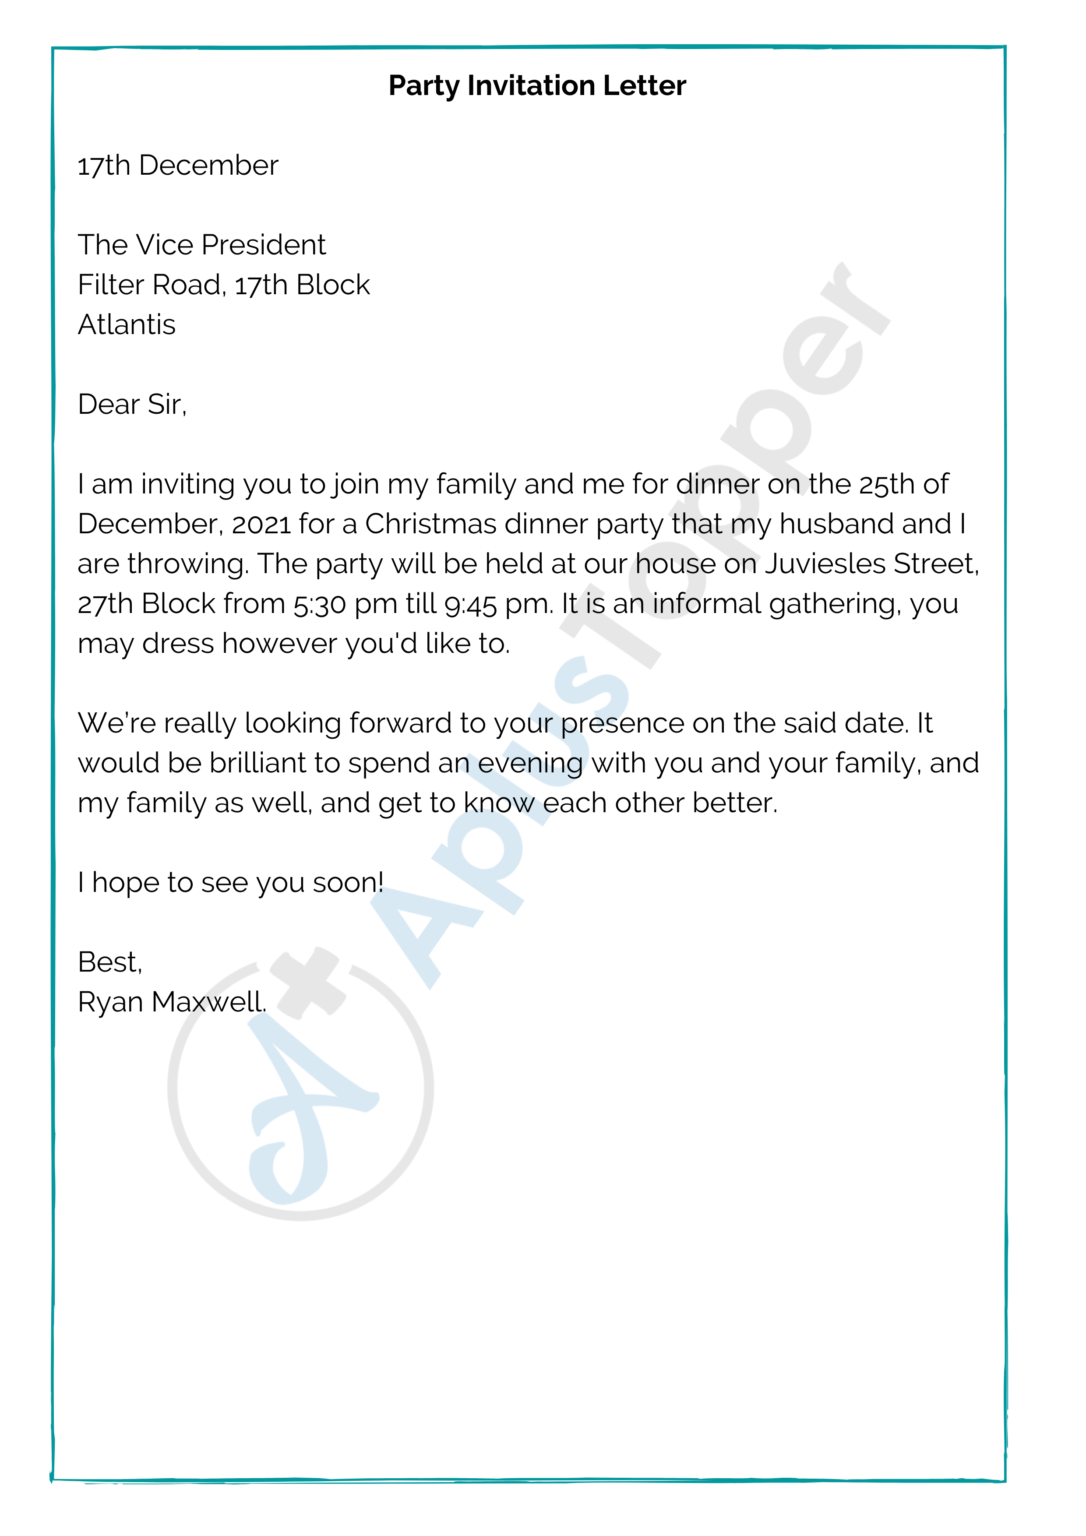 Letter Social Event Samples | Format, Examples and How To Write? - A